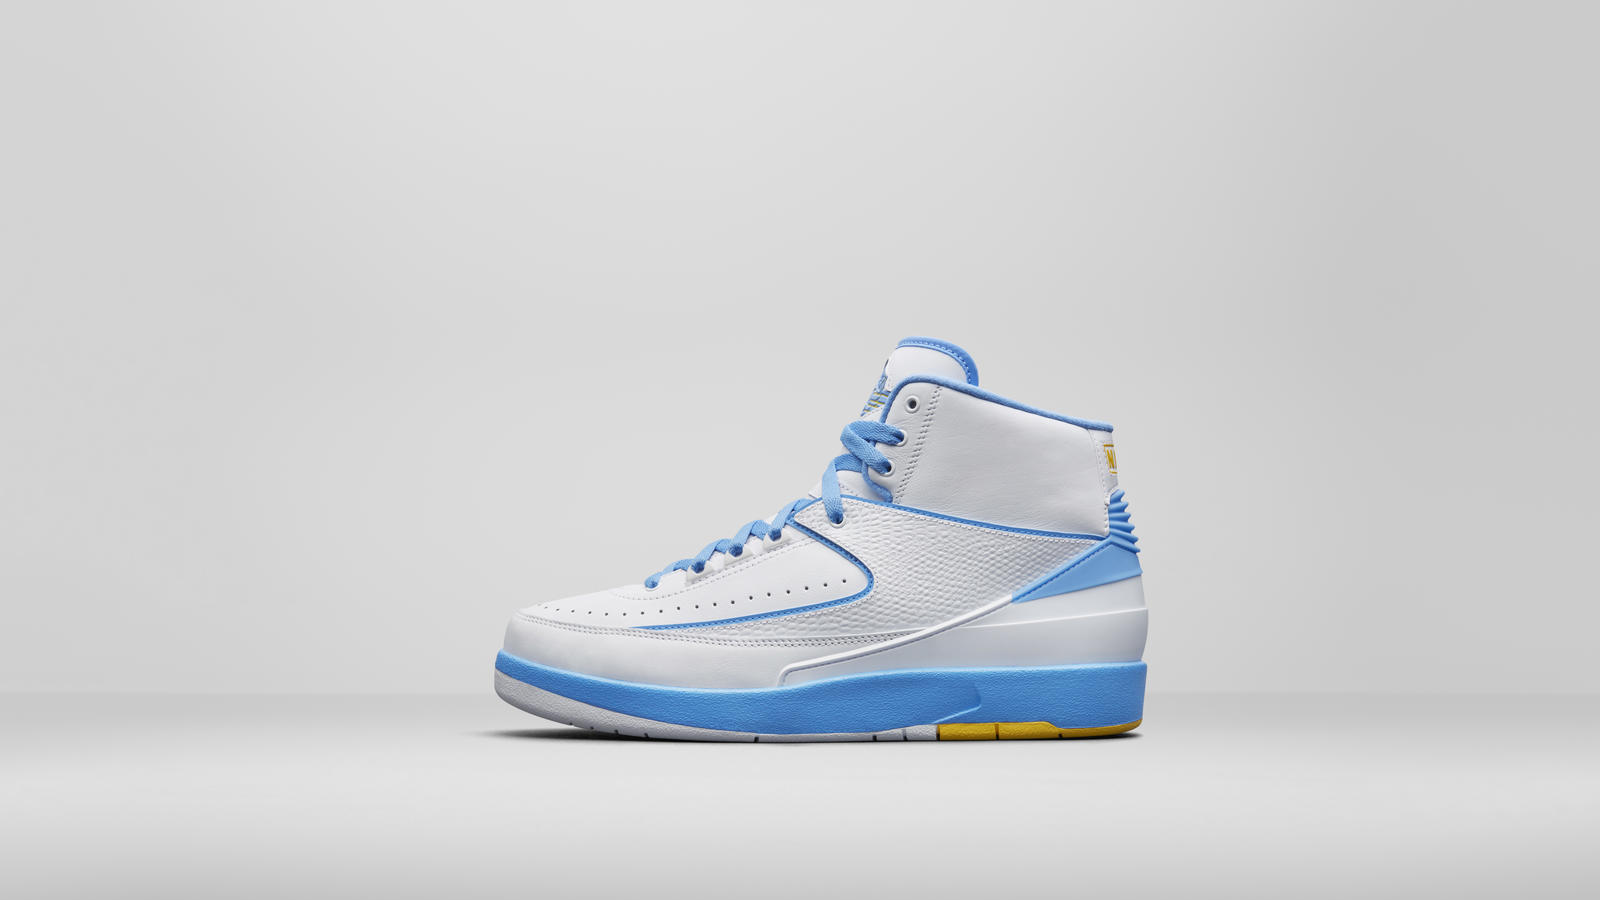 The Air Jordan 2 'Melo' Release Date is 